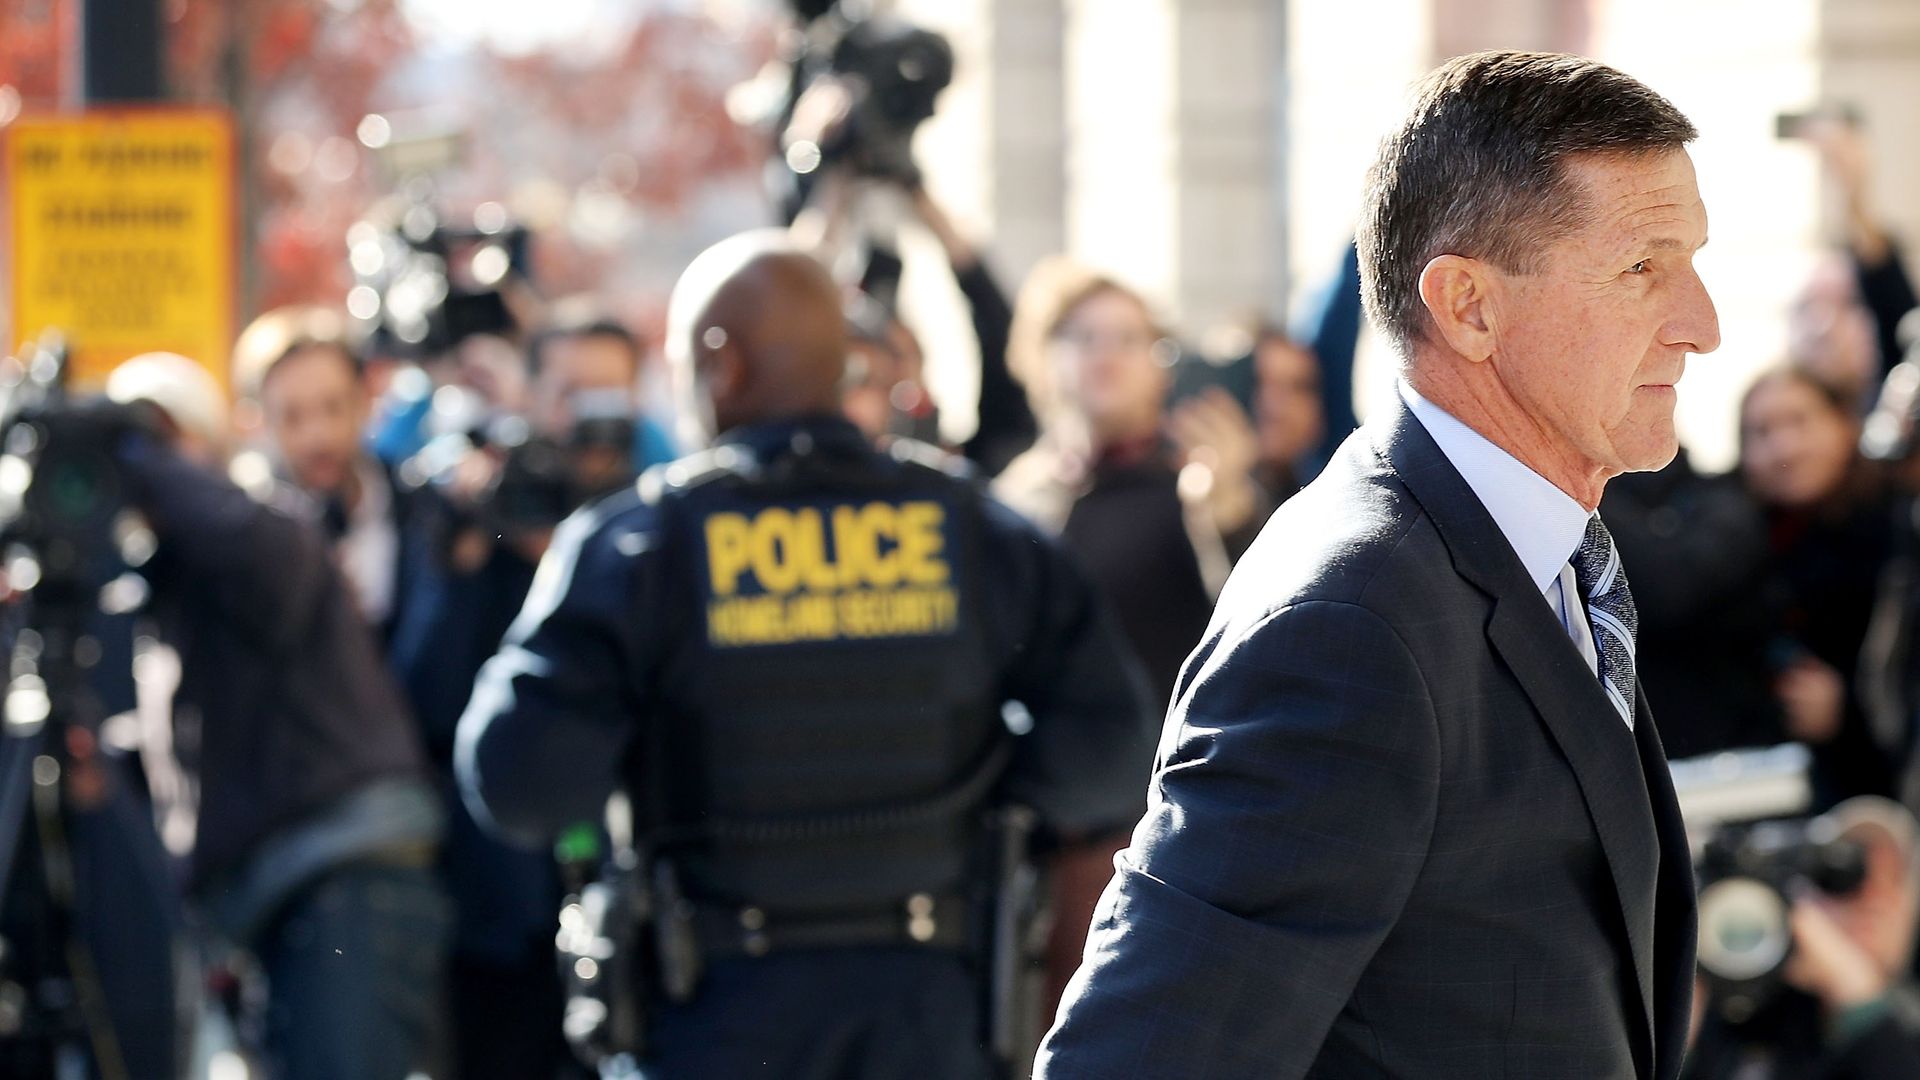 Michael Flynn, former national security advisor to President Trump, arrives for his plea hearing at the Prettyman Federal Courthouse in December. Photo: Chip Somodevilla/Getty Images